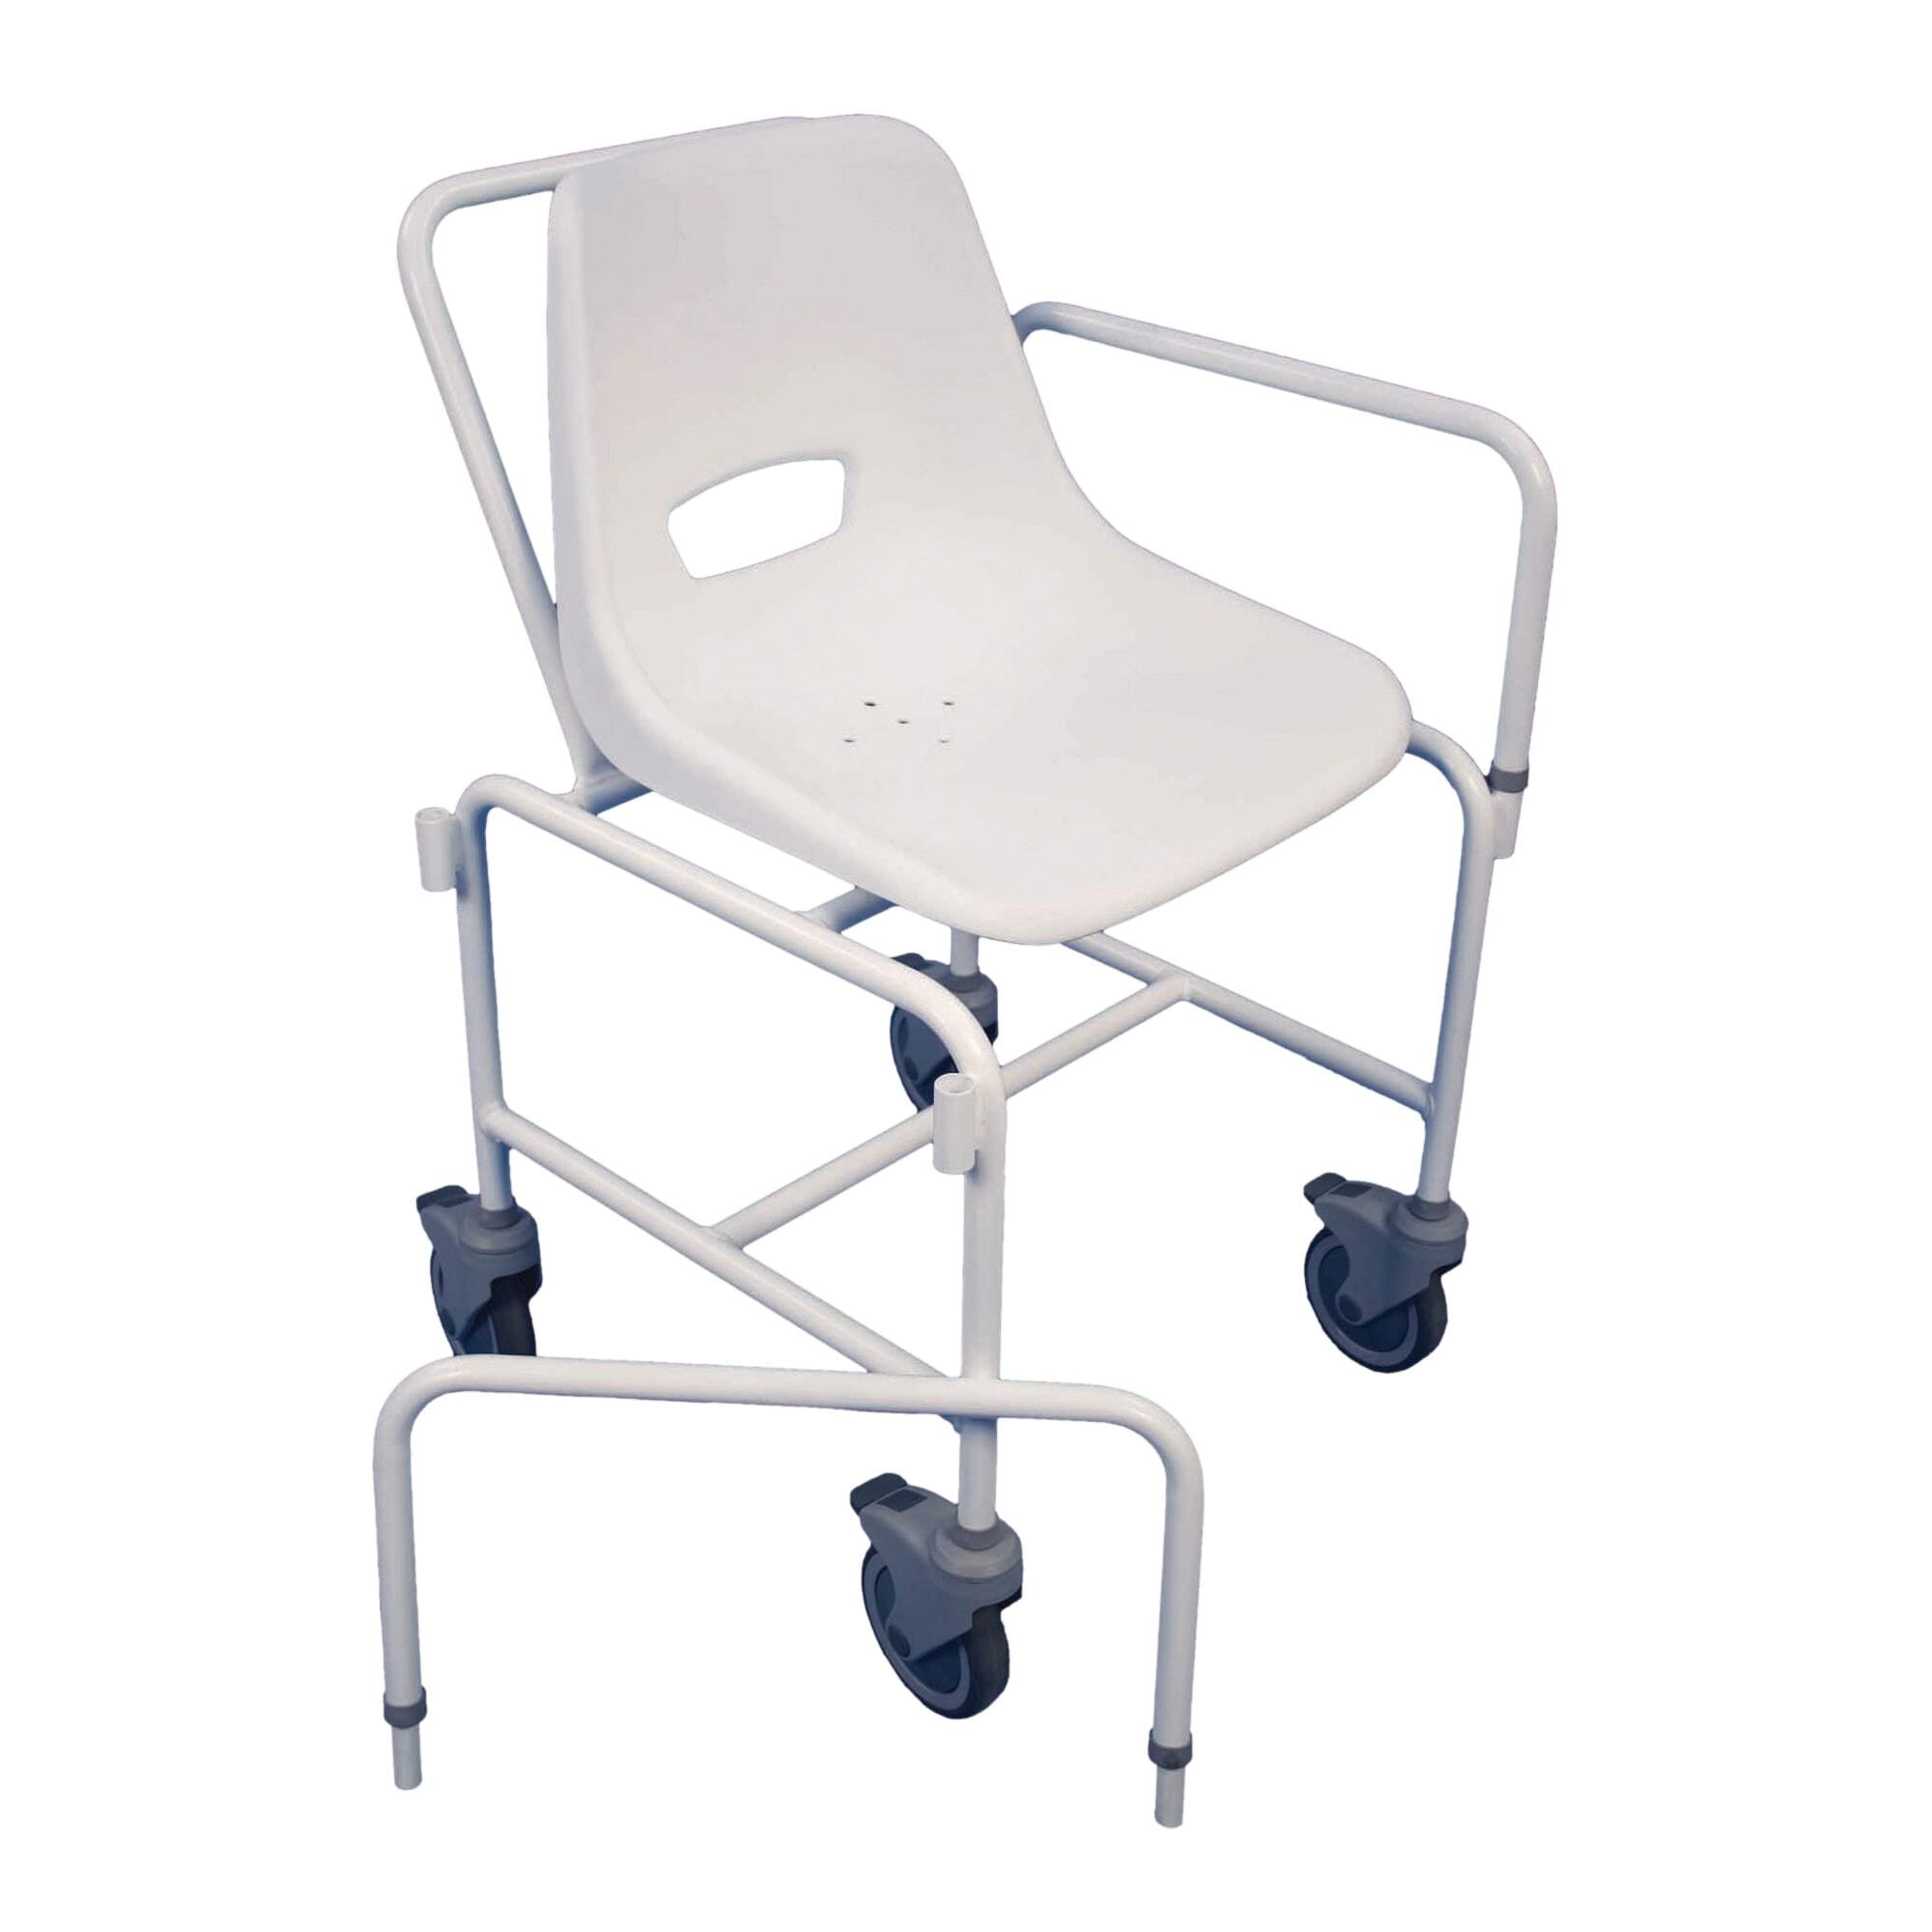 View Charing Attendant Propelled Shower Chair information